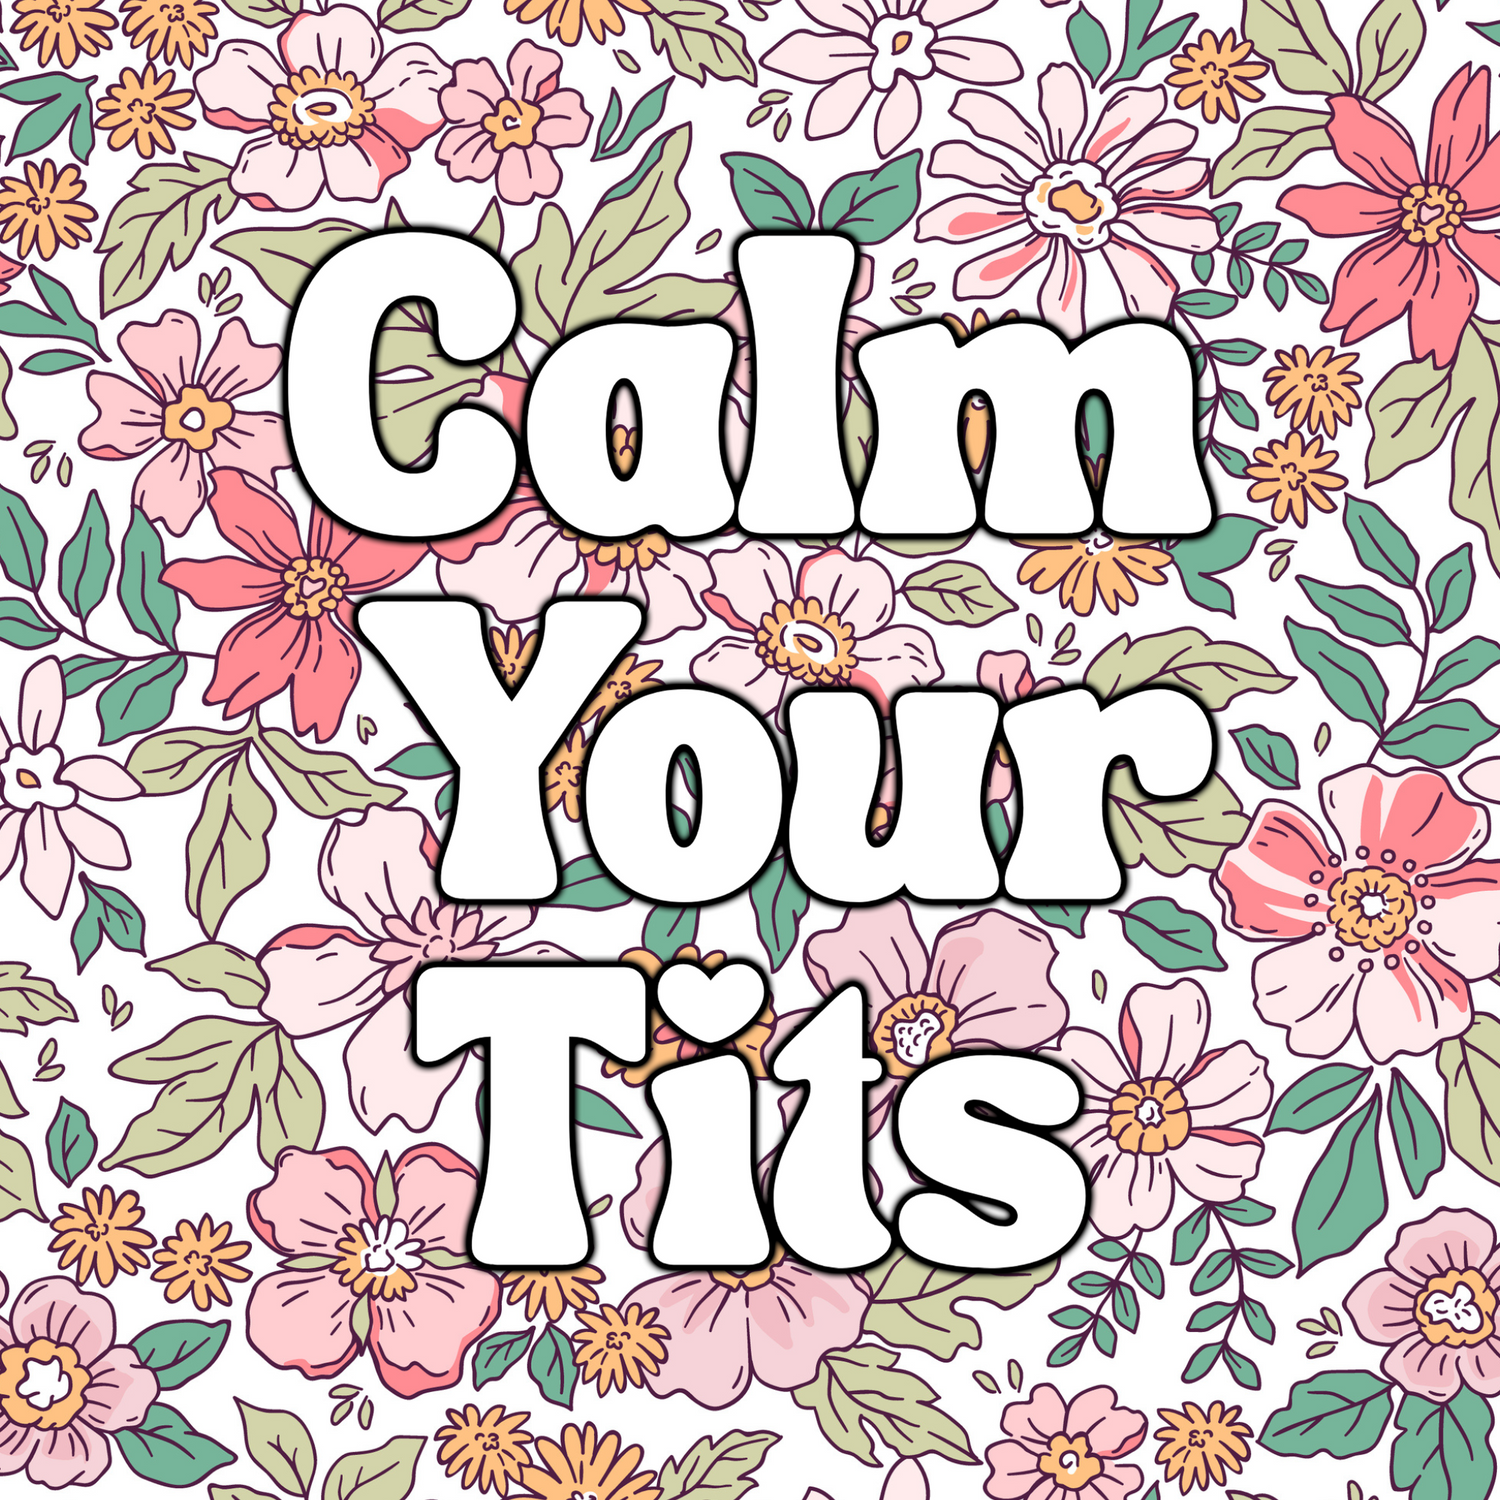 Calm Your Tits